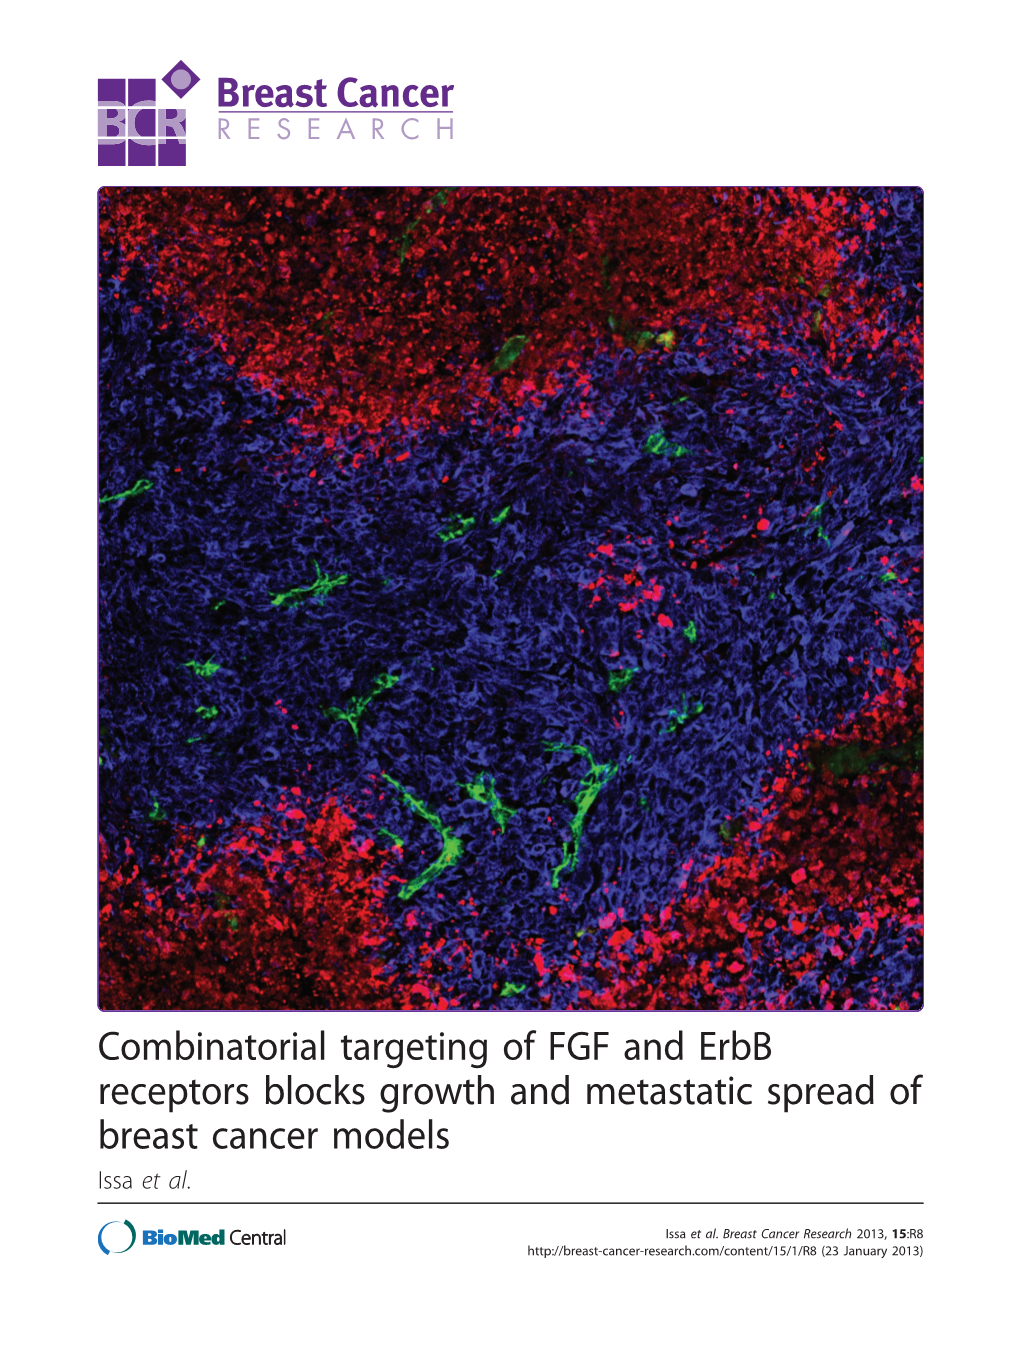 Combinatorial Targeting of FGF and Erbb Receptors Blocks Growth and Metastatic Spread of Breast Cancer Models Issa Et Al